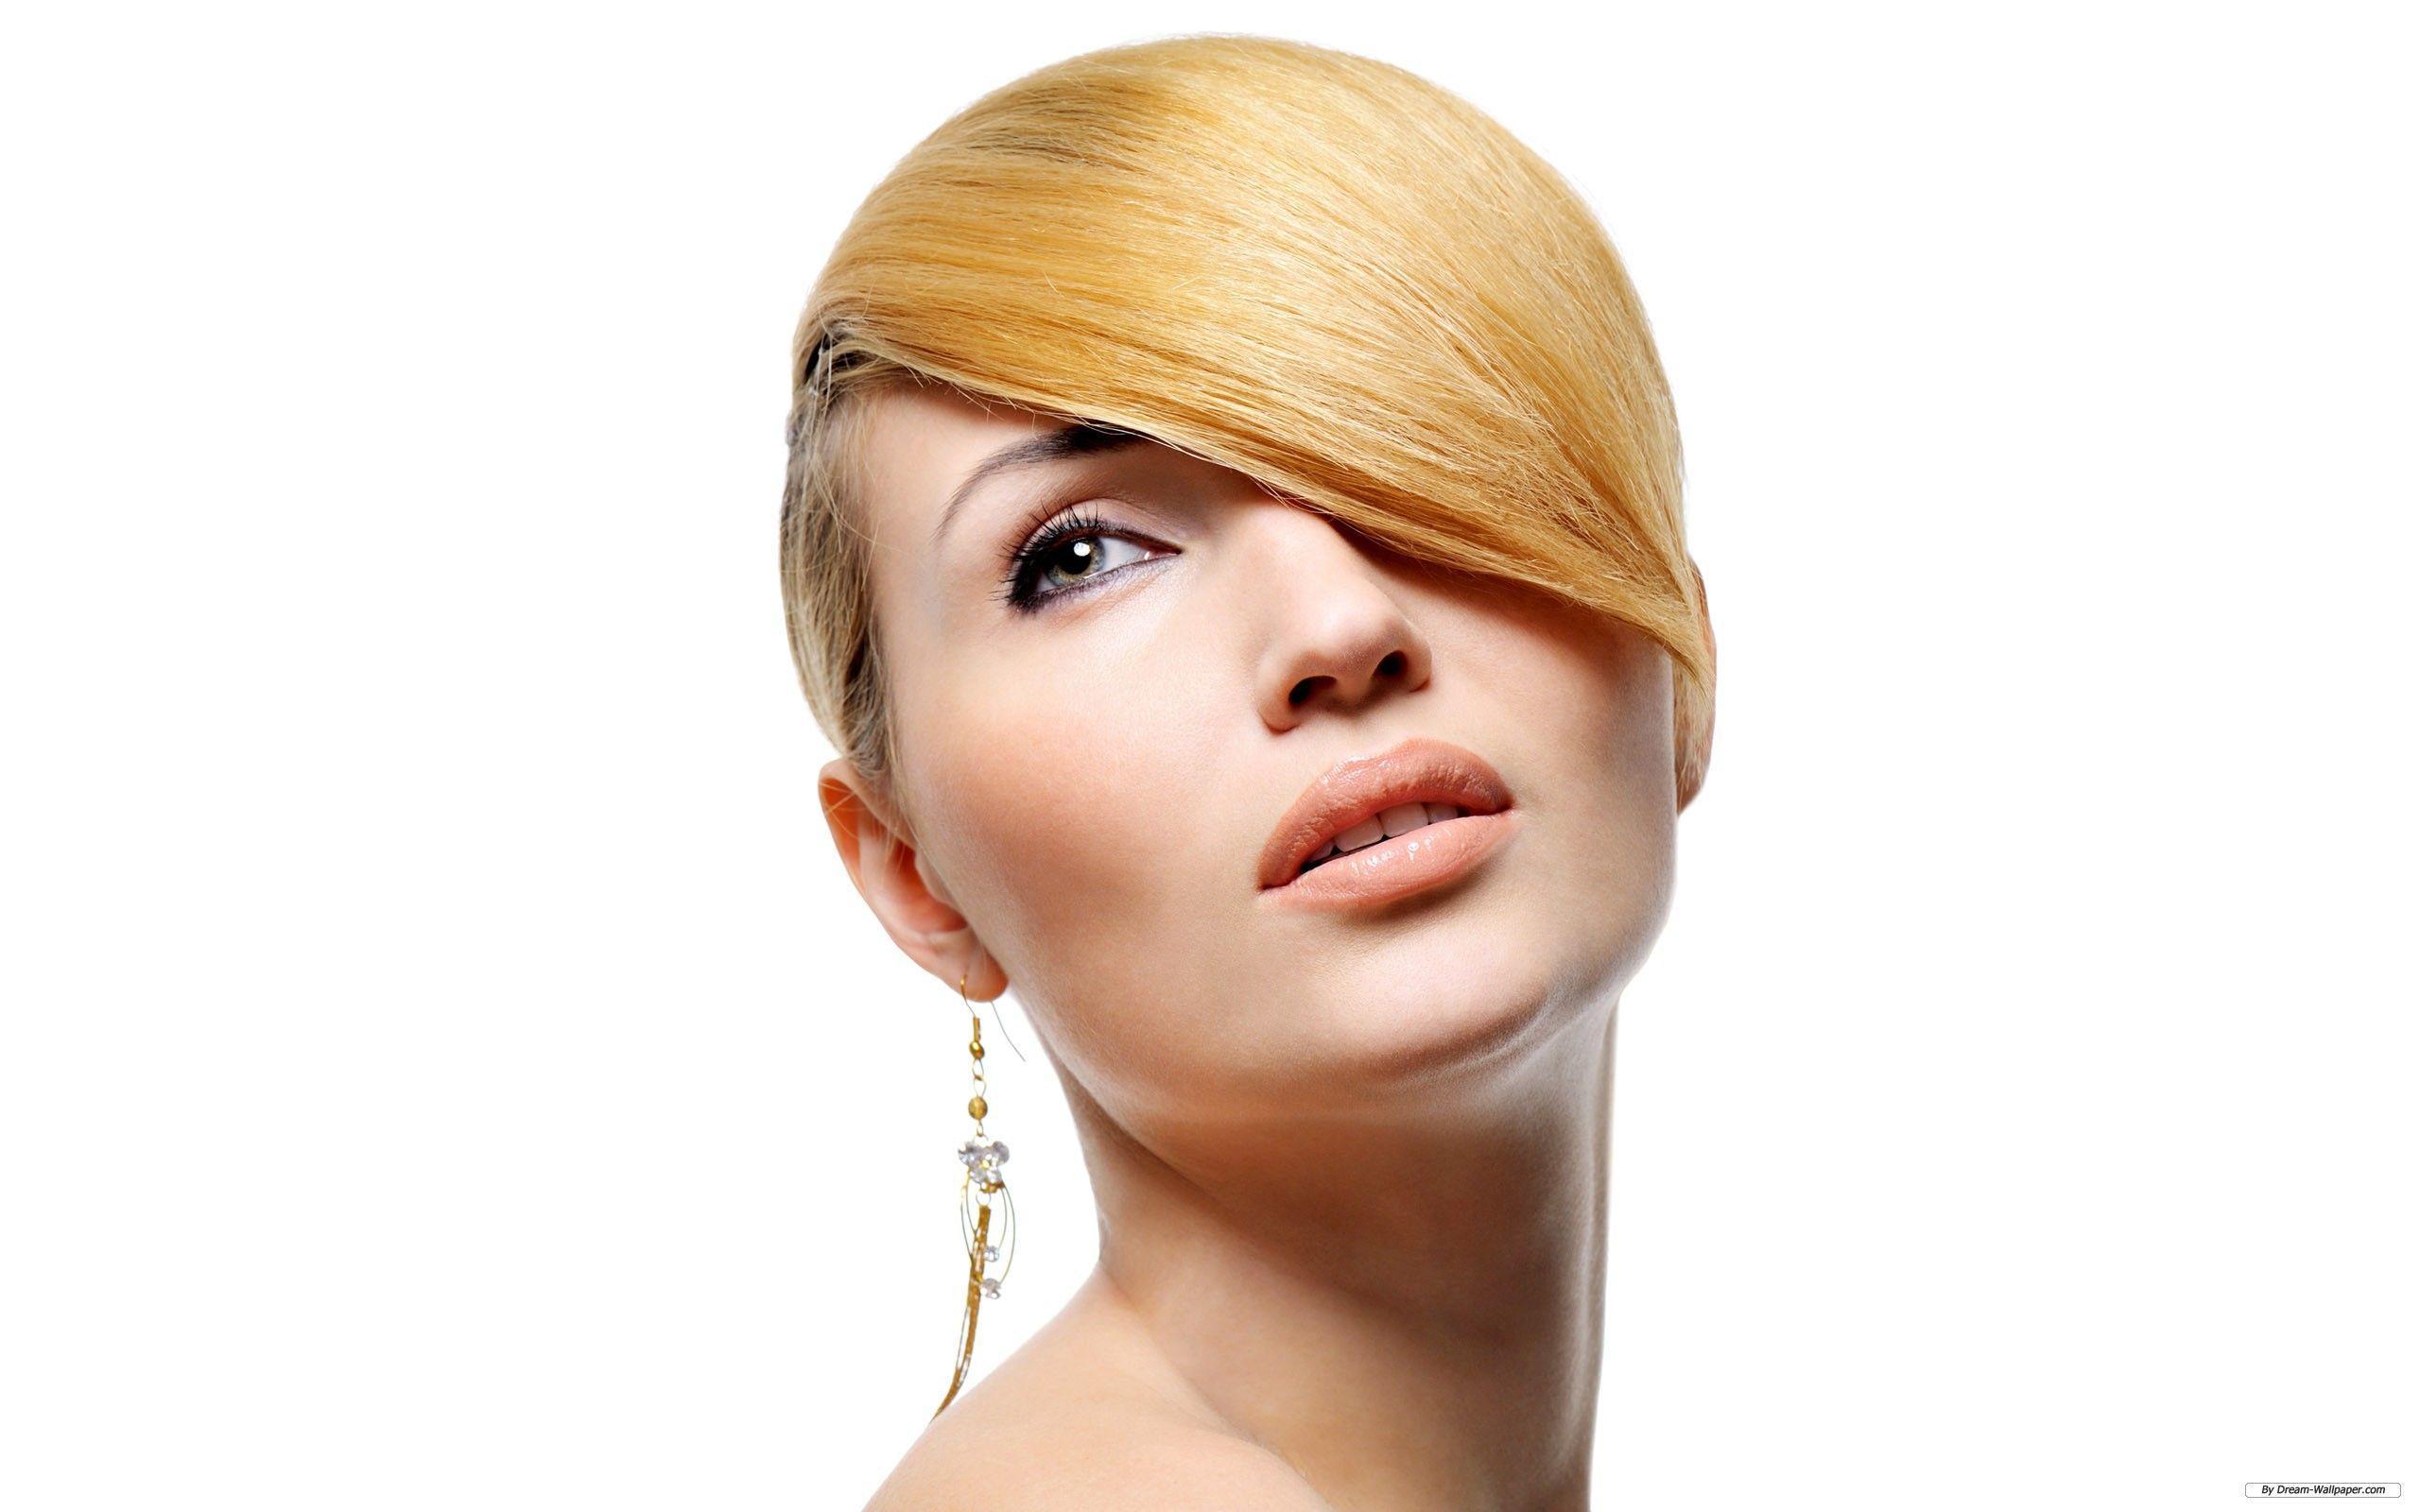 Hairstyles photography secrets of modern hairstyles